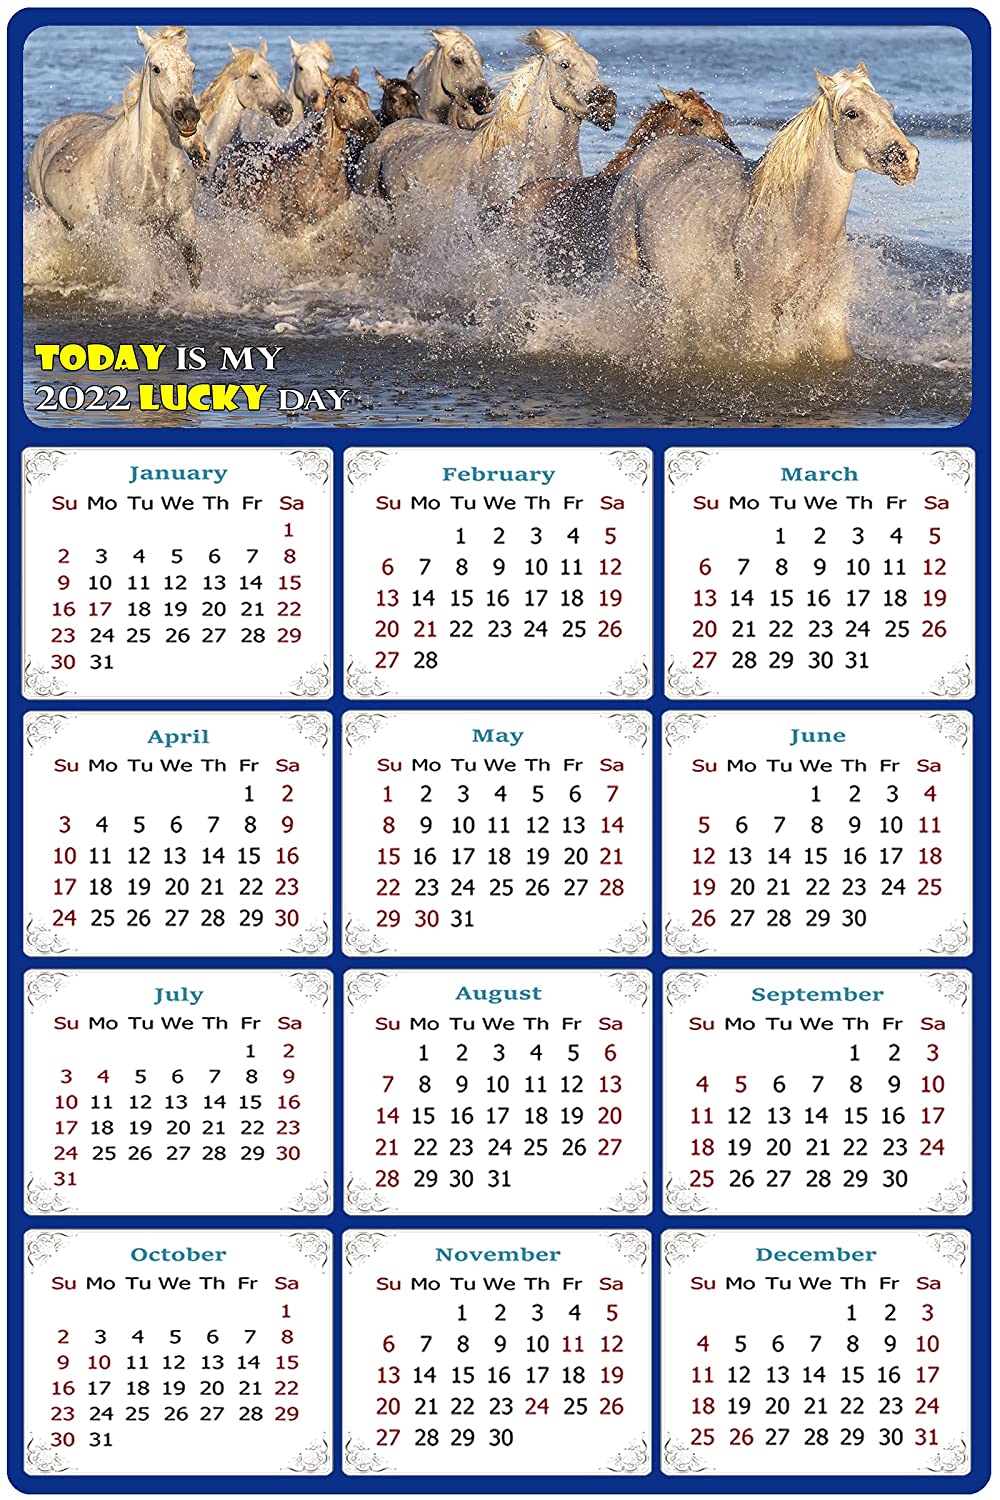 Pelican-Industrial 2021 Magnetic Calendar - Calendar Magnets - Today is My Lucky Day - Horses Themed 08 (5.25 x 8)